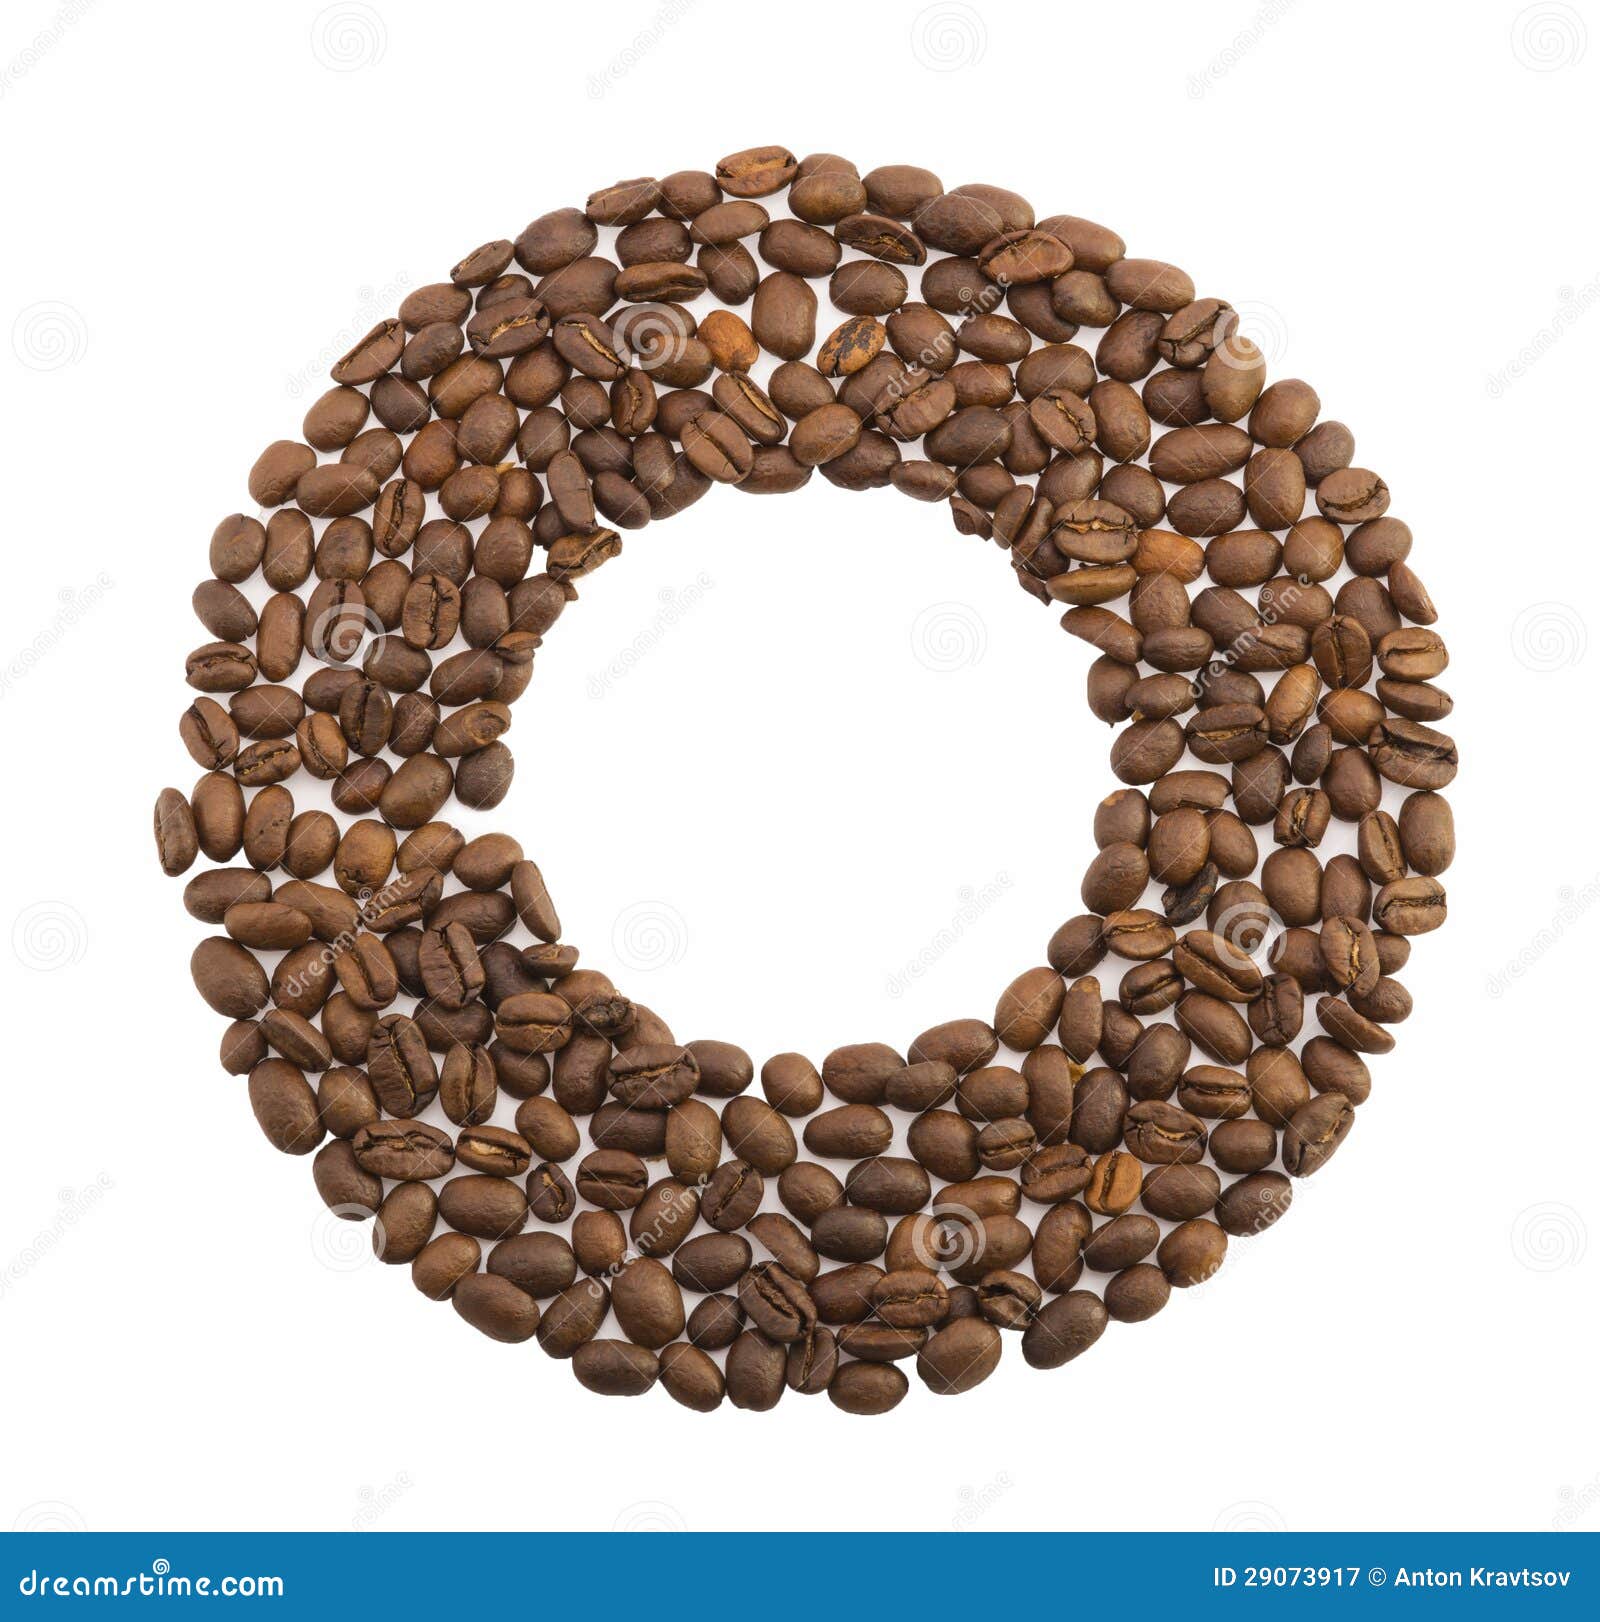  Circle  Of Coffee  Beans Royalty Free Stock Photography 